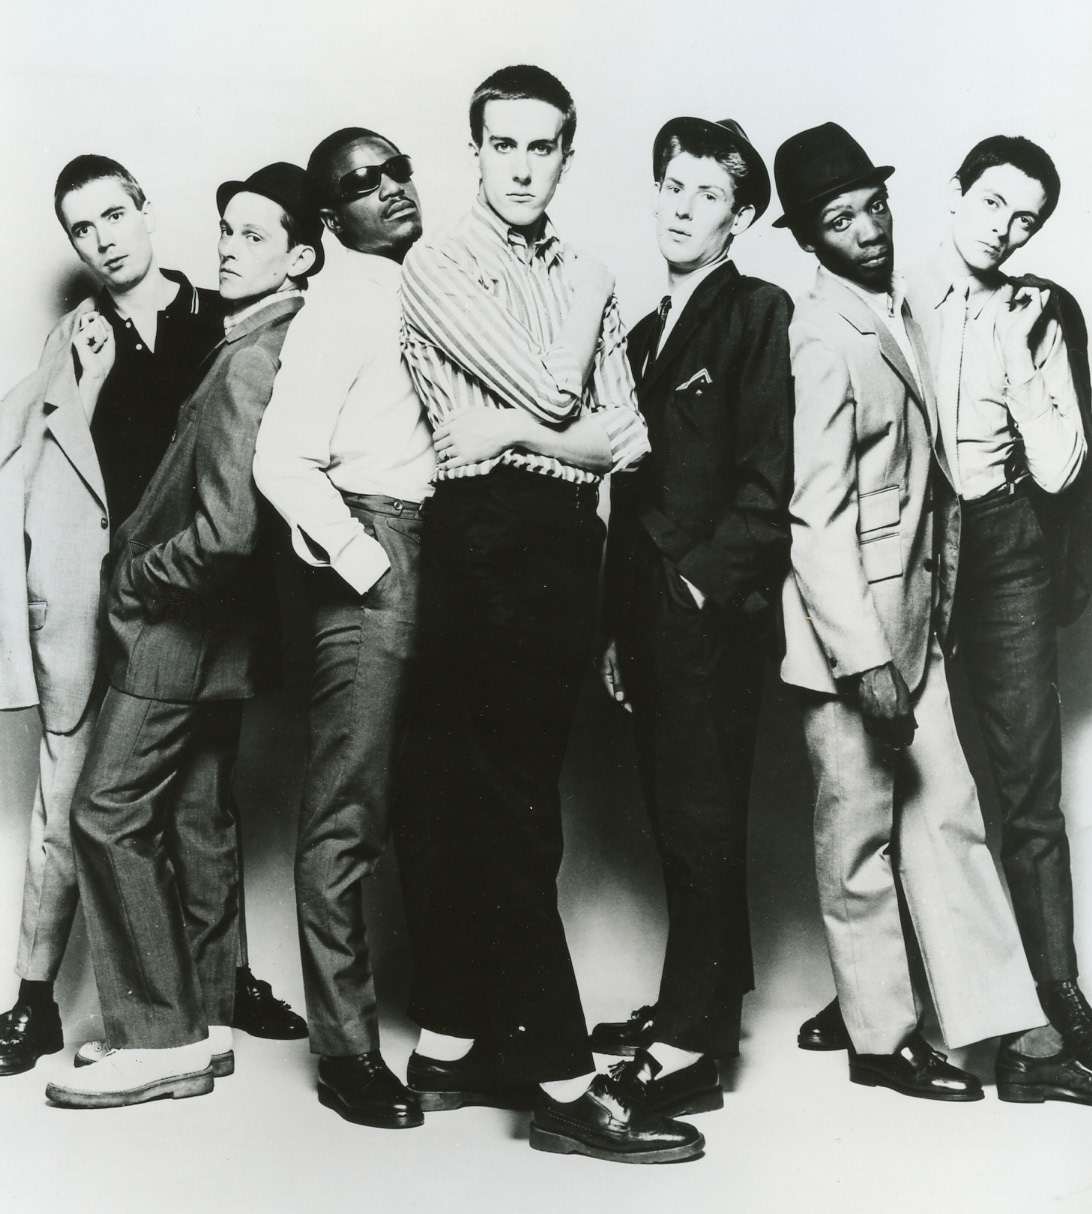 In a time of skinheads, punks and dreads, The Specials' style, for me, stood head and shoulders above everyone else